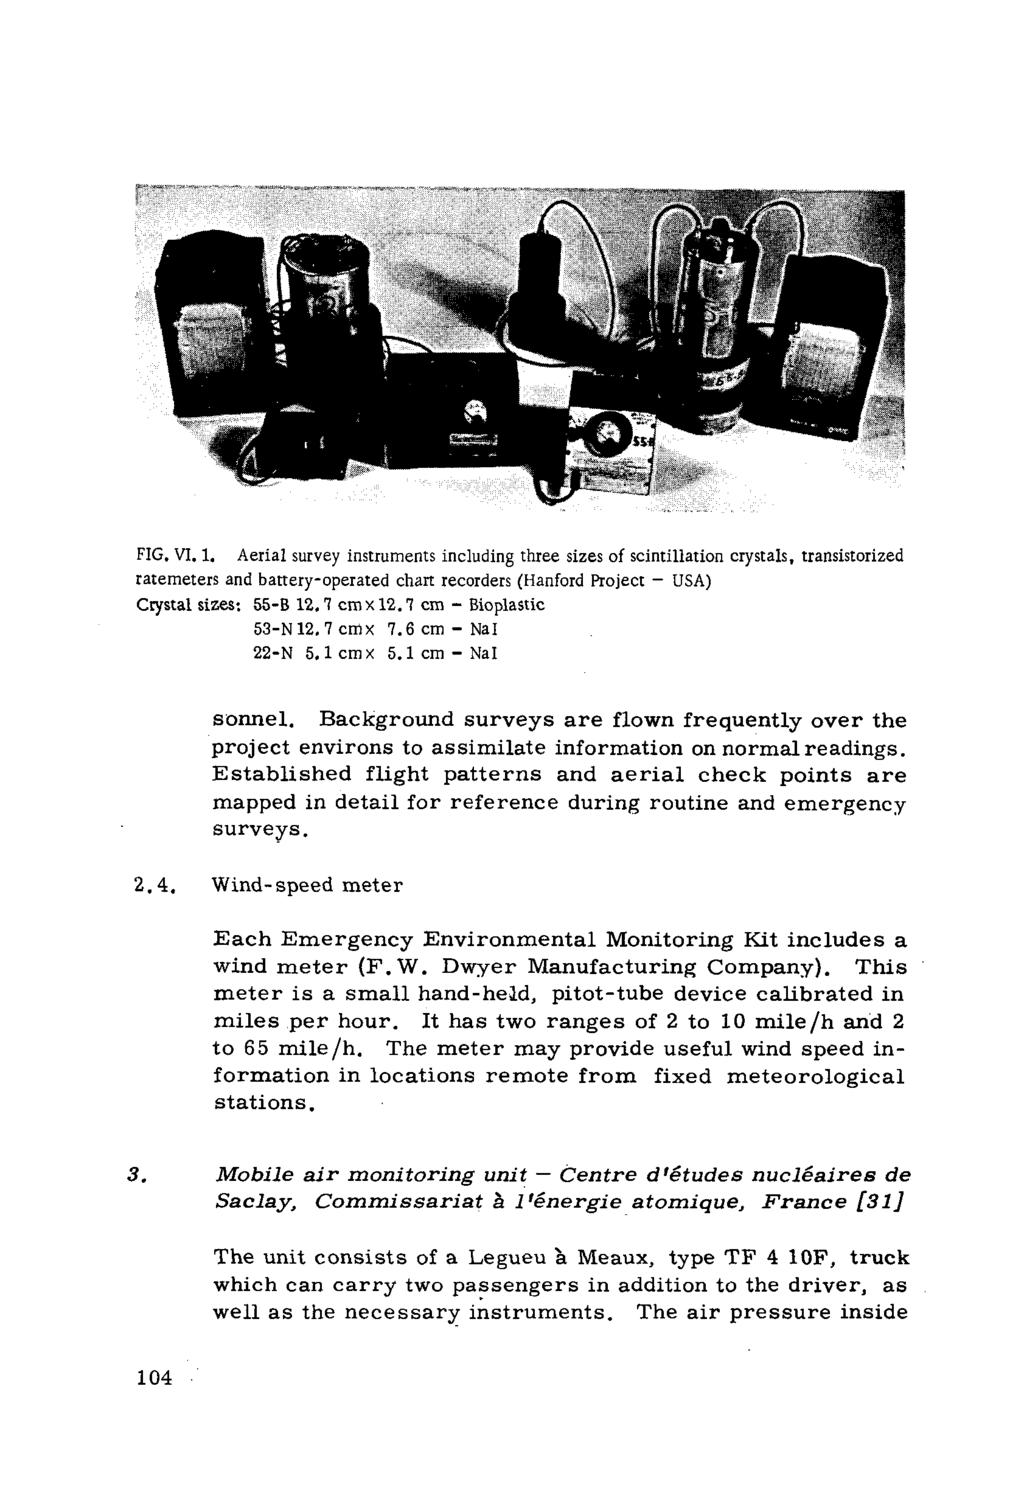 FIG. VI, 1. A erial survey instruments including three sizes of scintillation crystals, transistorized ratemeters and battery-operated chart recorders (Hanford Project - USA) Crystal sizes: 55-B 1 2.